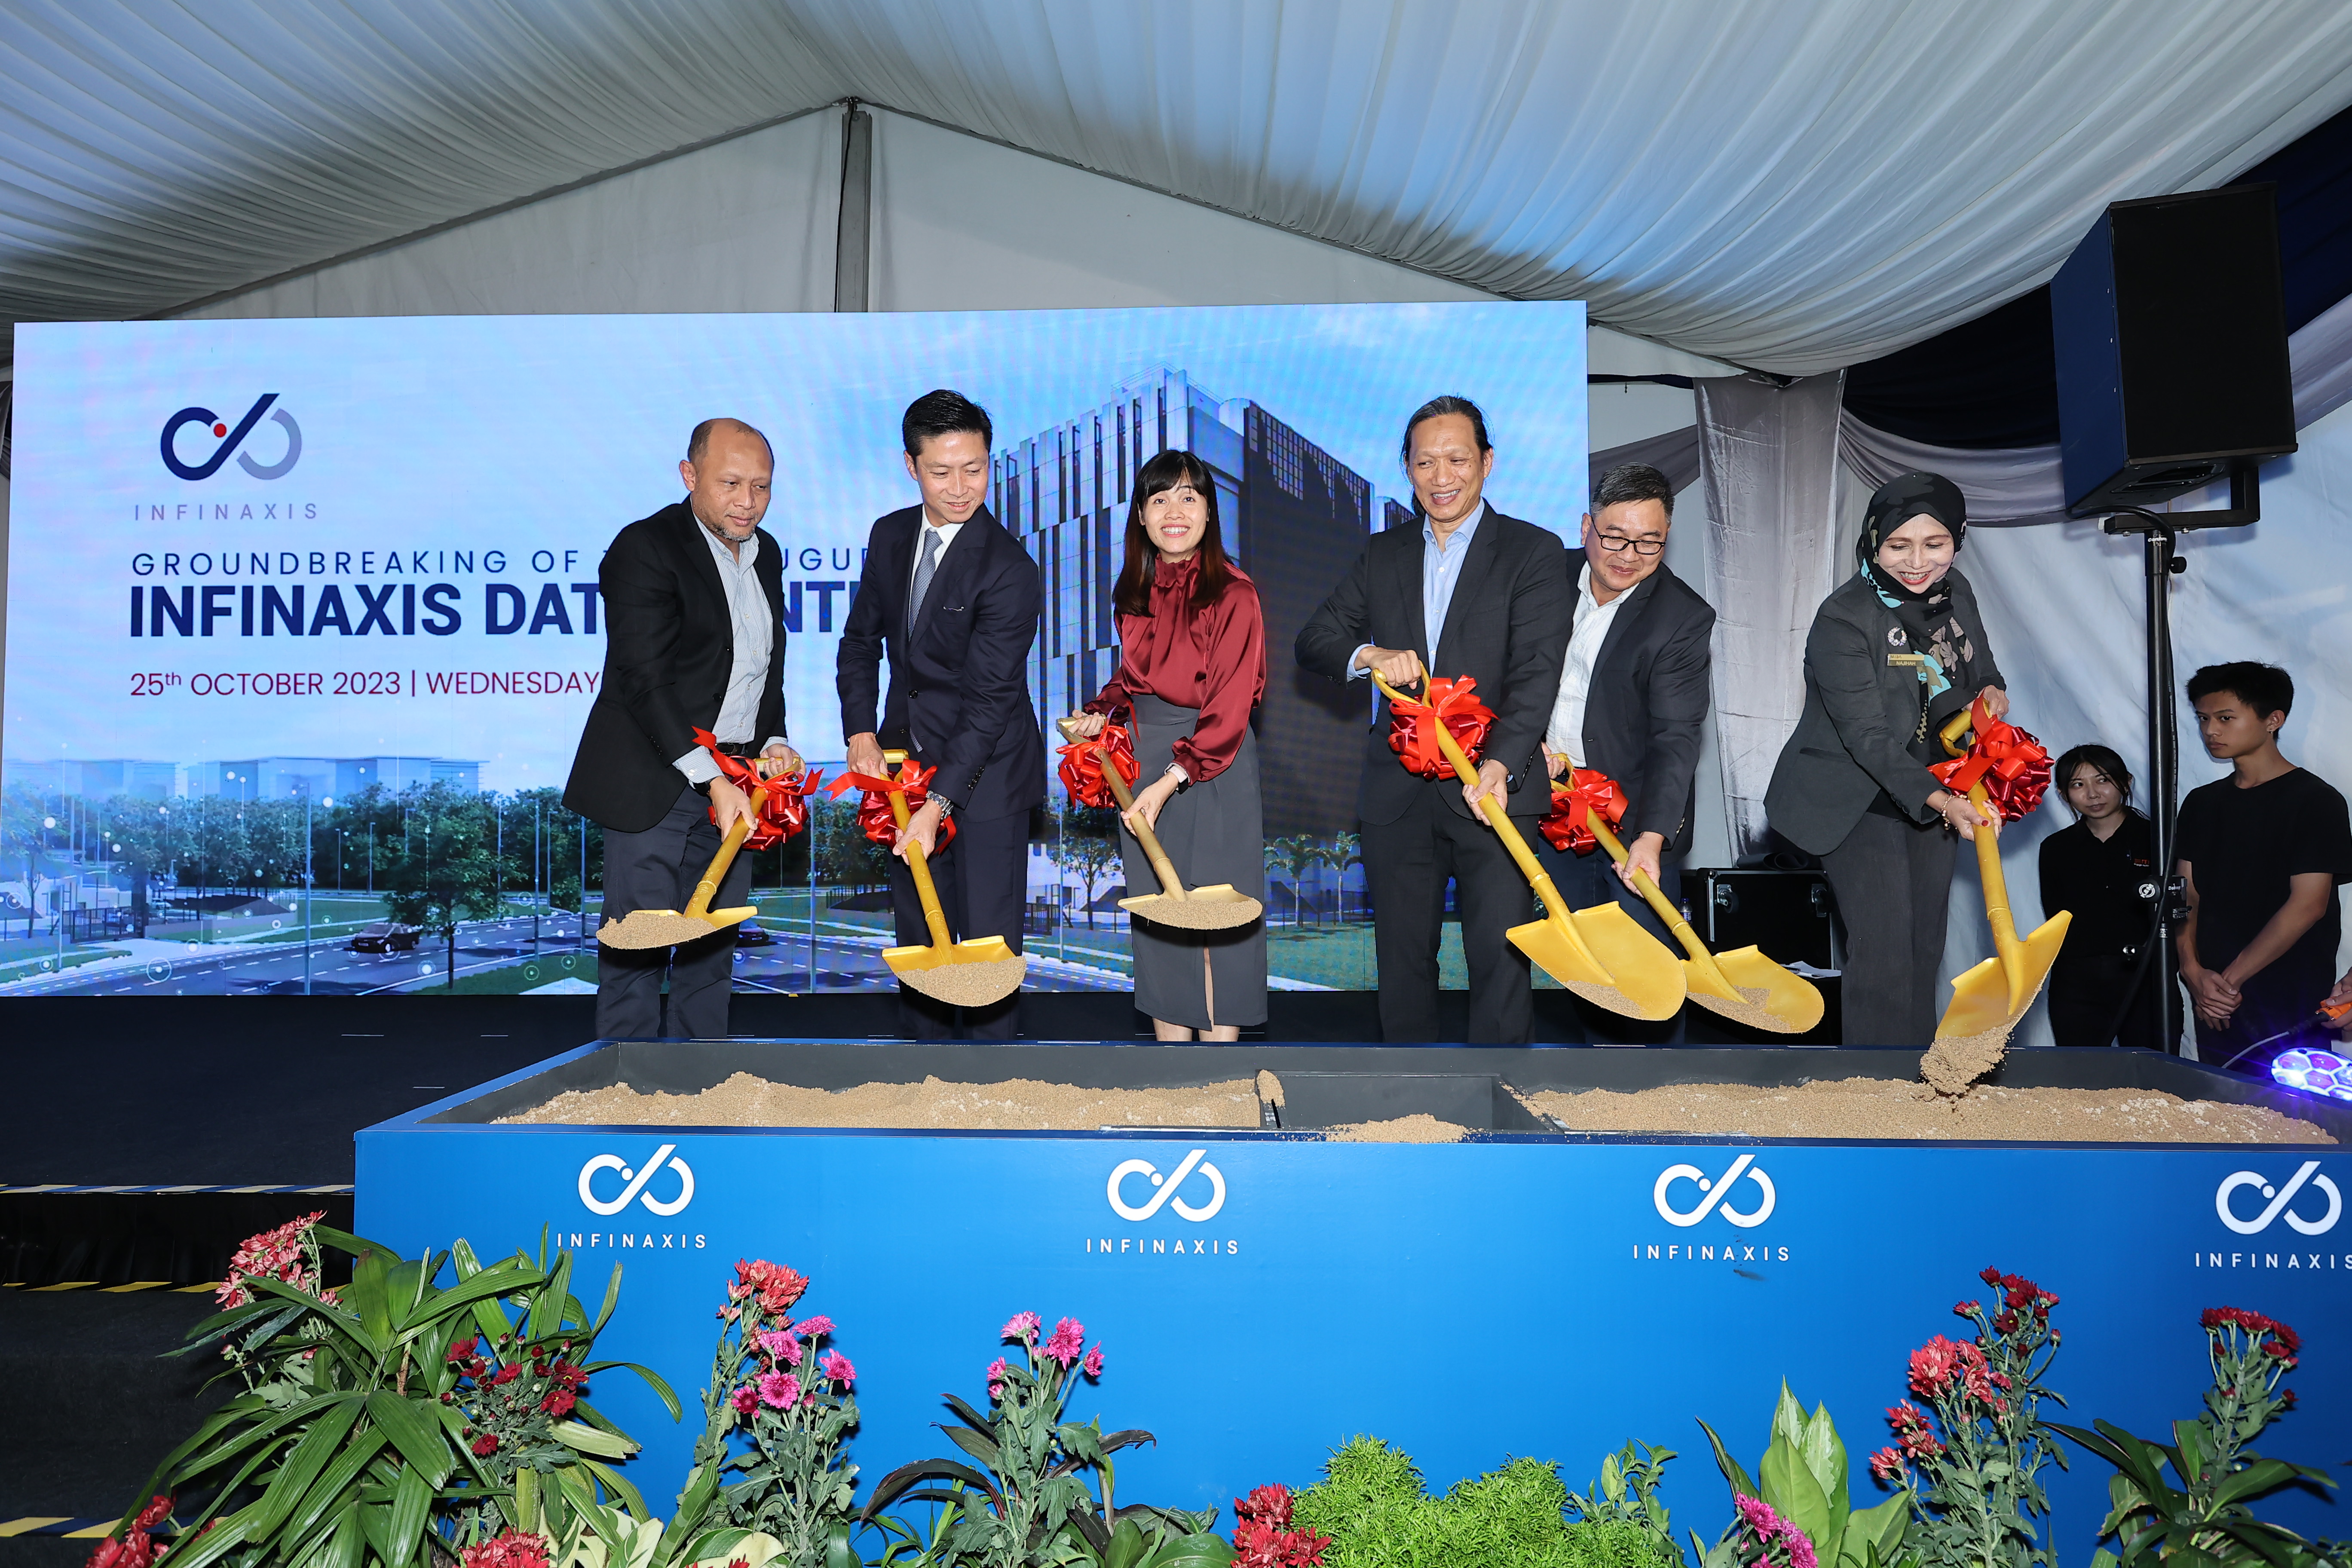 From left to right: 1. Director and Head of Division of MDEC: Wan Murdani； 2. President and Managing Principal of Gaw Capital Partners: Kenneth Gaw； 3. Deputy Minister of Communications and Digital: Teo Nie Ching; 4. CEO of Infinaxis Data Centre: Zahri Mirza; 5. Founder and Partner of A3 Capital: Amos Ong; 6. Executive Director of Investment Promotion of Malaysian Investment Development Authority (MIDA): Najihah Abadi.